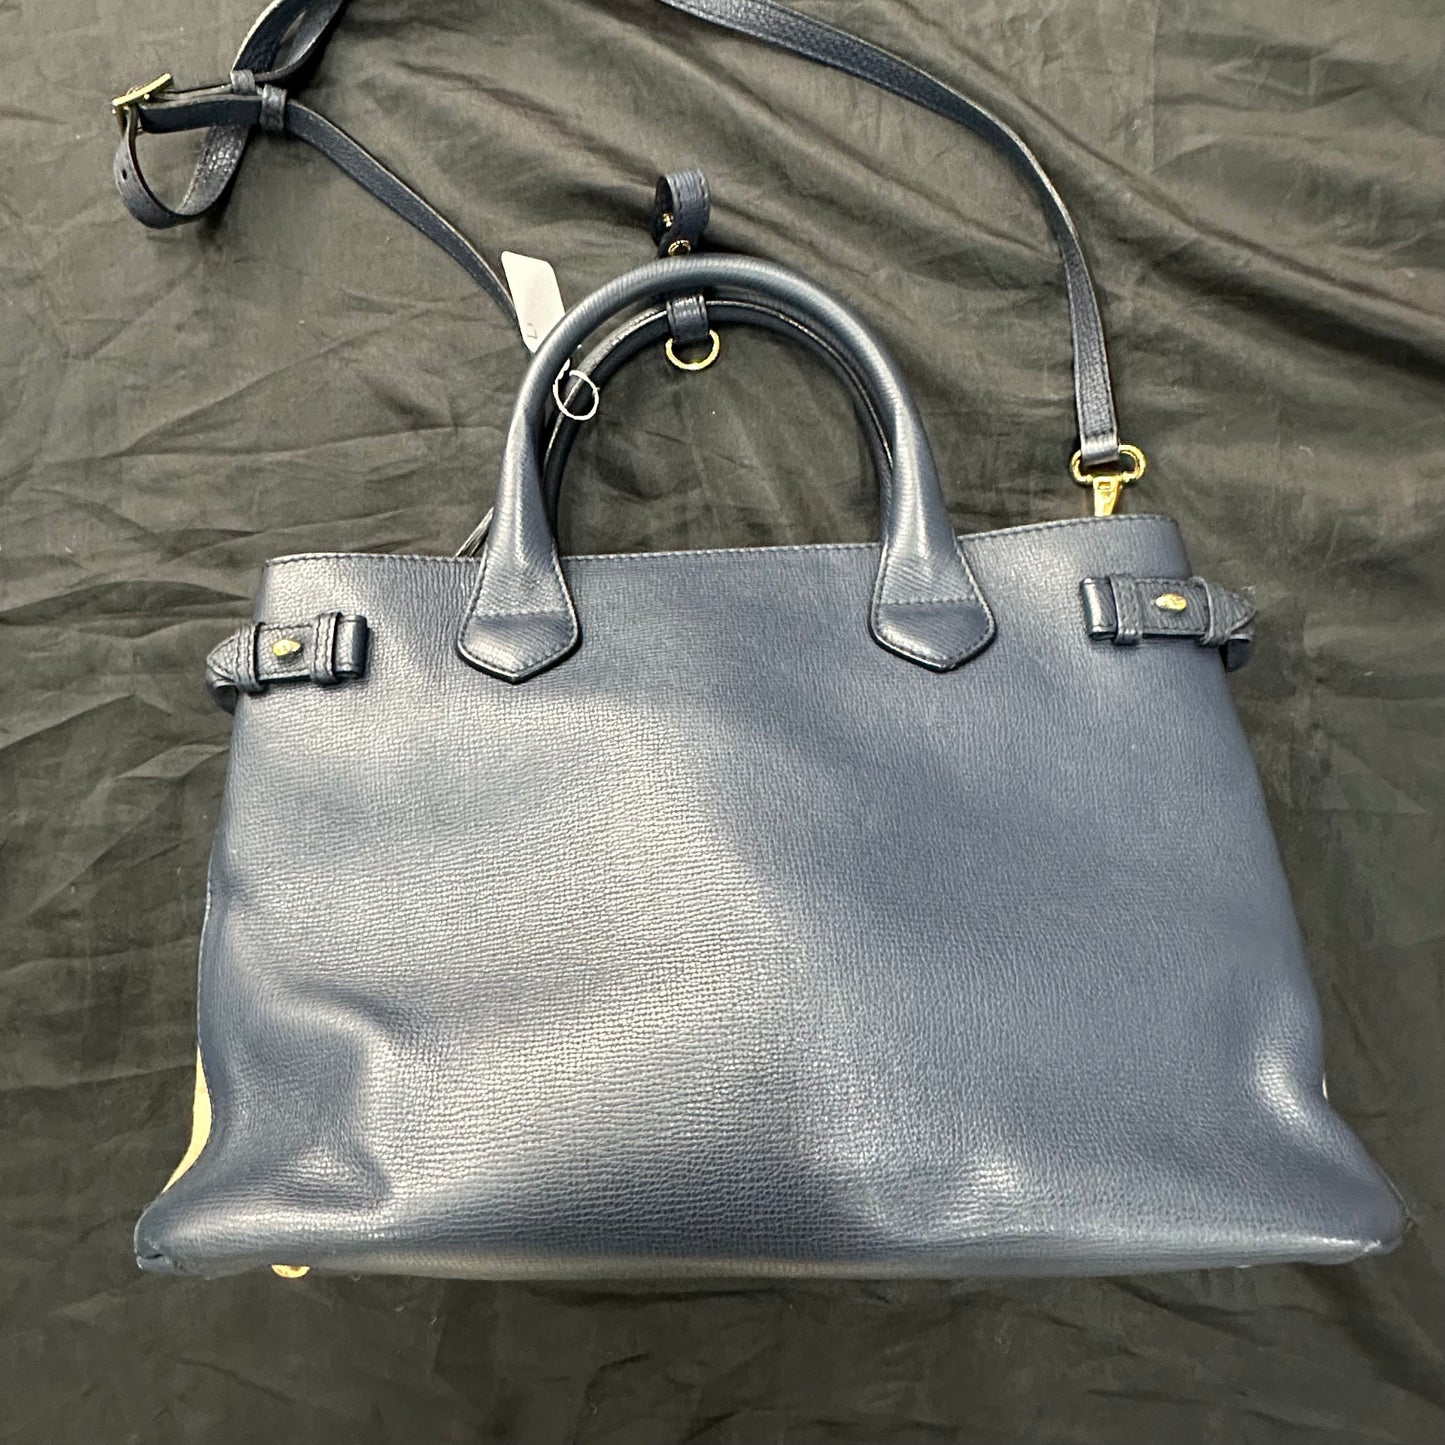 Burberry big Tote in navy Blue